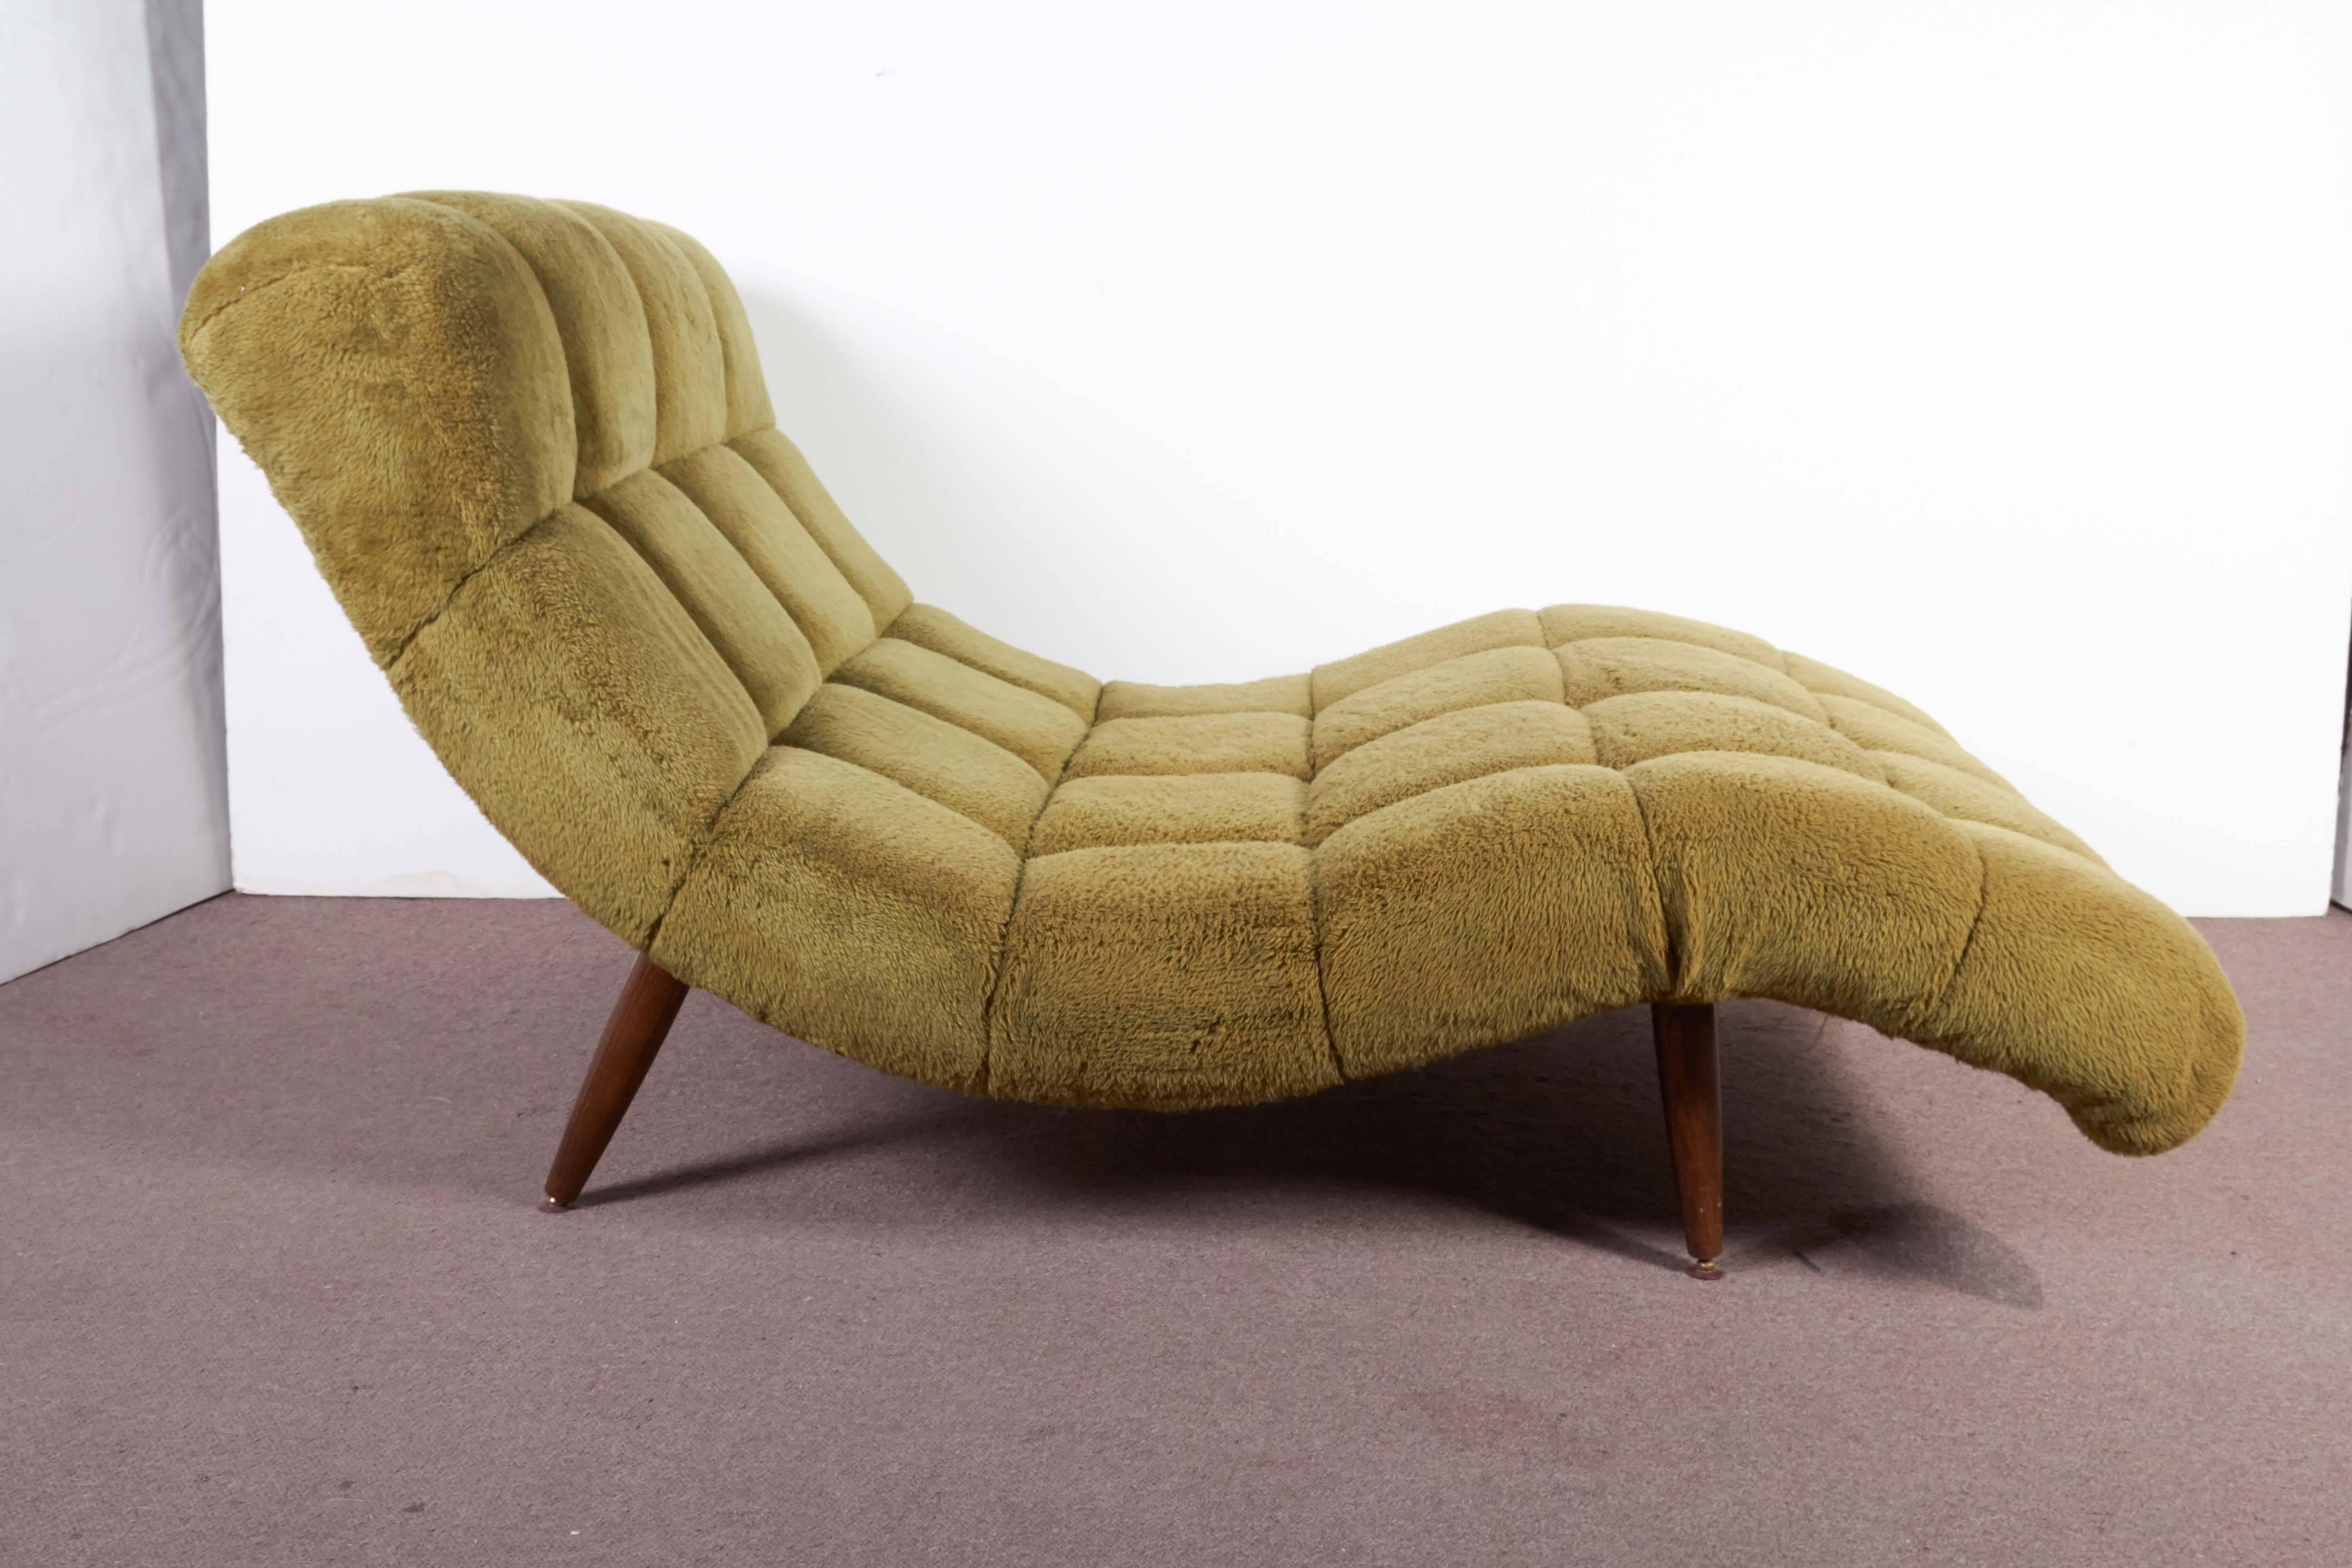 A modernist, wave design couples loveseat or recamier in the style of Adrian Pearsall in pistachio colored faux fur with a very comfortably designed seating area that can seat one or two.
The upholstery is in original condition with its cushioned,